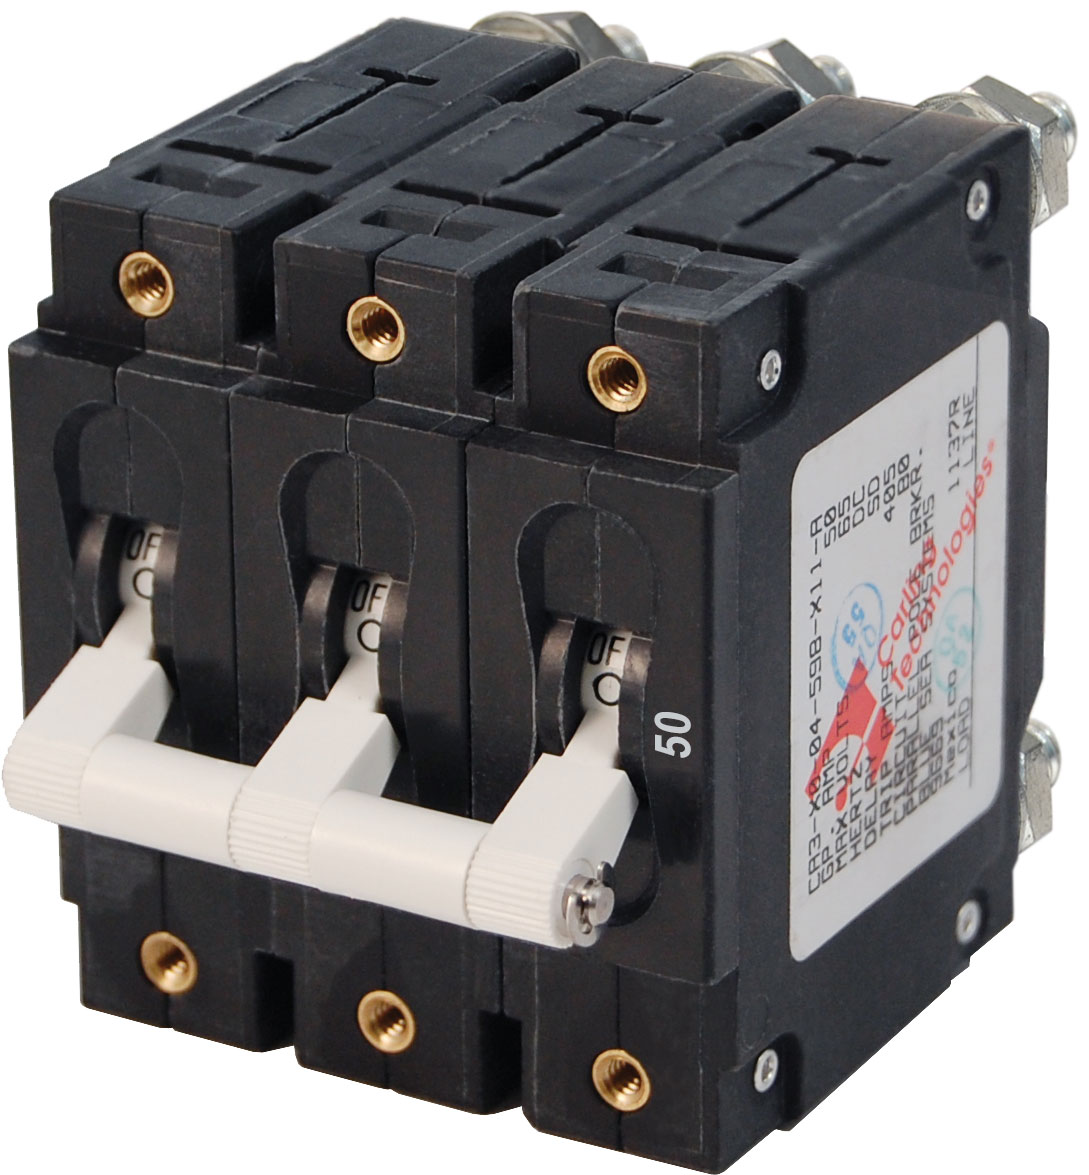 Part # 7287B  Manufacturer Blue Sea Systems  Product Type Circuit Breaker